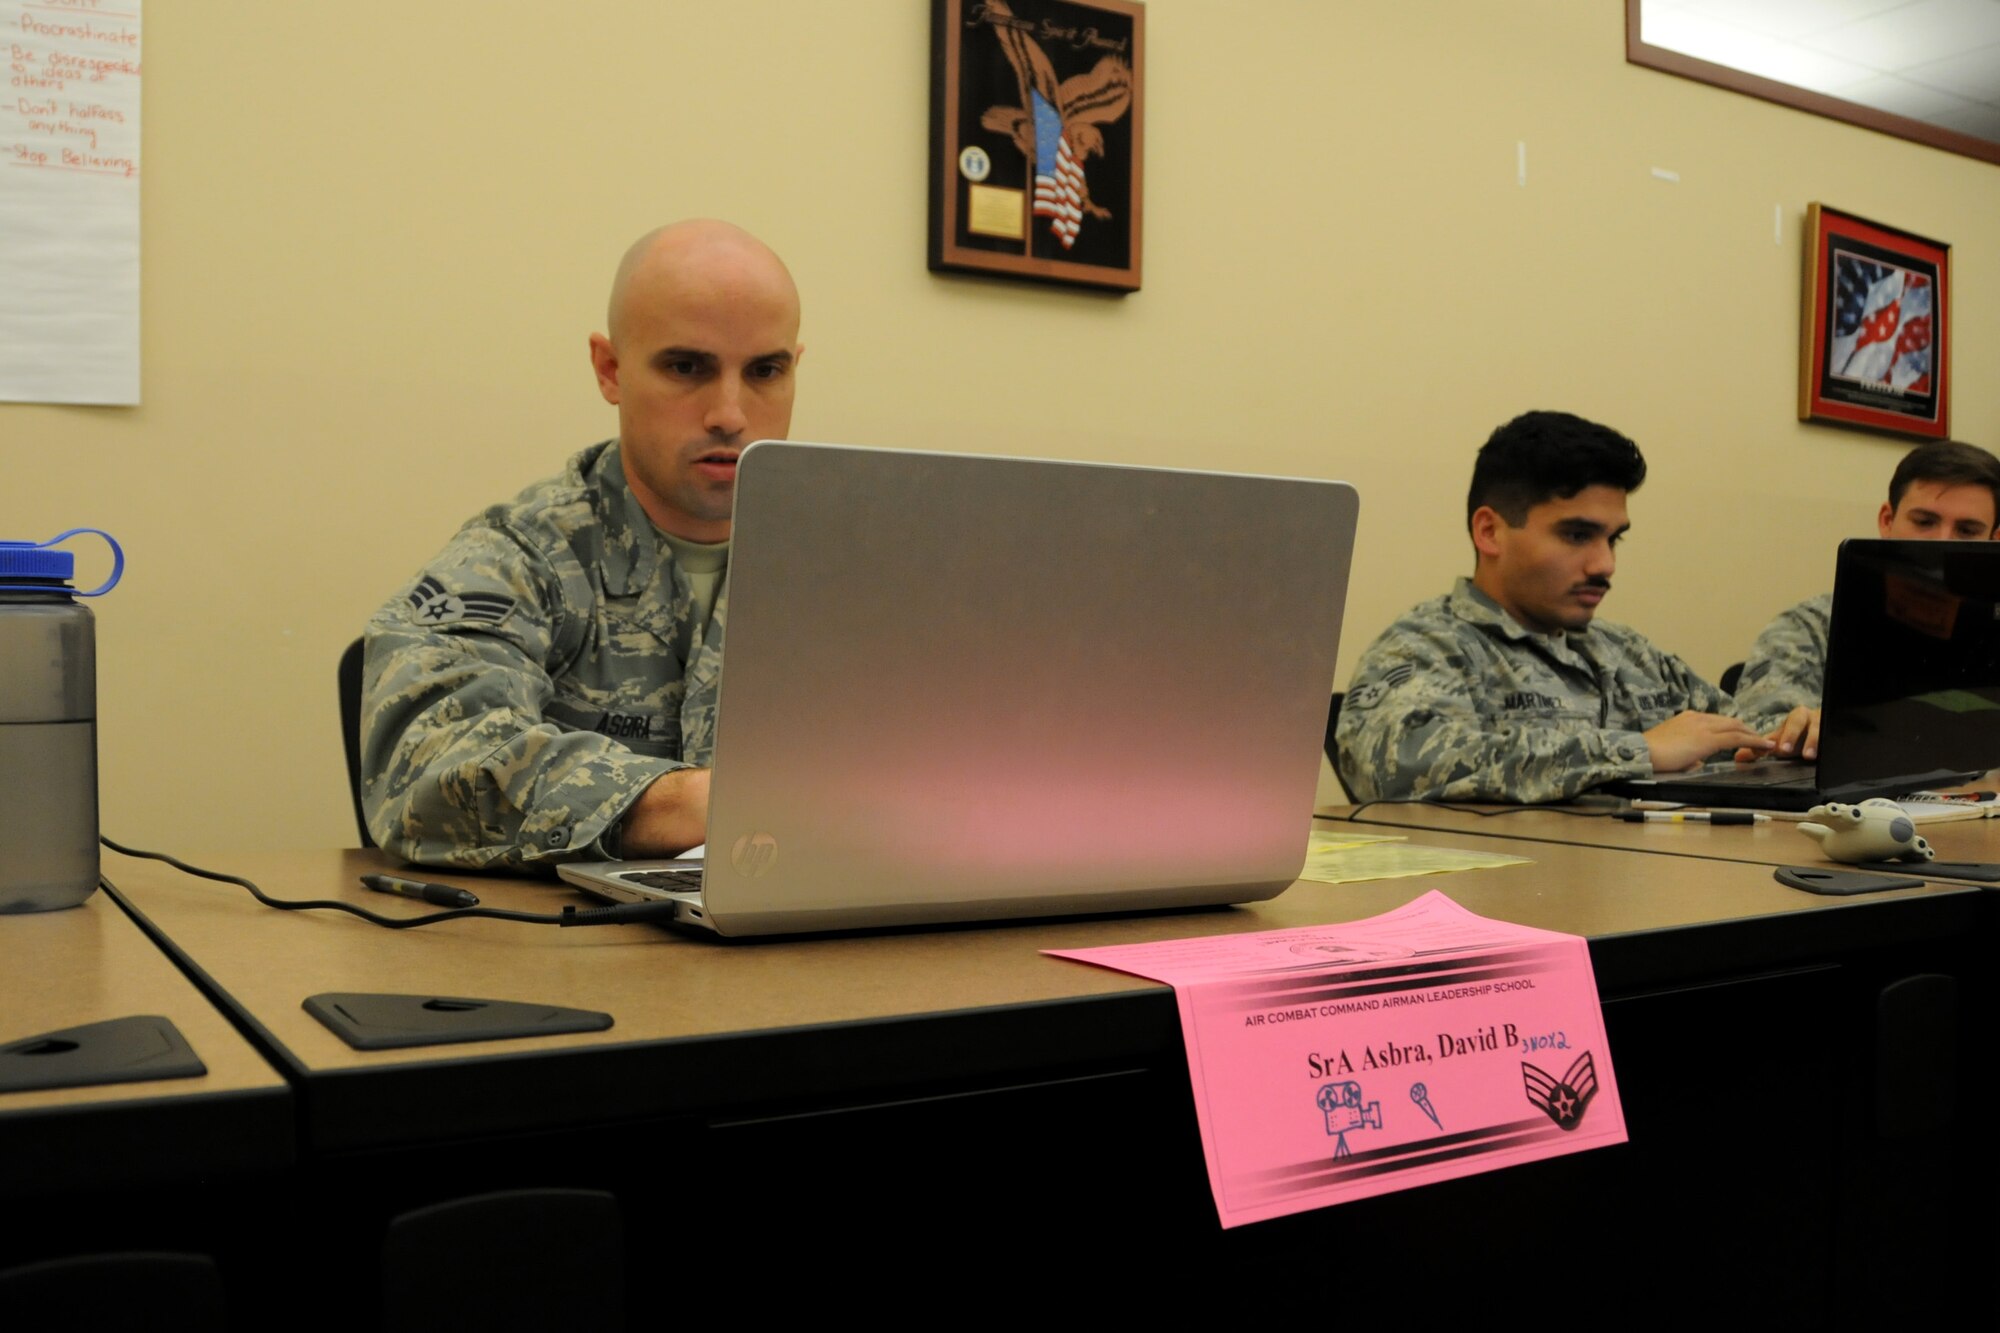 Senior Airman David B. Asbra, a public affairs specialist from the 185th Air Refueling Wing at Sioux City, Iowa, works on an assignment at the James M. McCoy Airman Leadership School at Offutt Air Force Base, Nebraska, on December 3, 2015. Airman Leadership School consists of 192 hours of training and airmen will also receive nine college credit hours towards their Community College of the Air Force degree.  (U.S. National Guard photo by Staff Sgt. Daniel S. Ter Haar/Released)